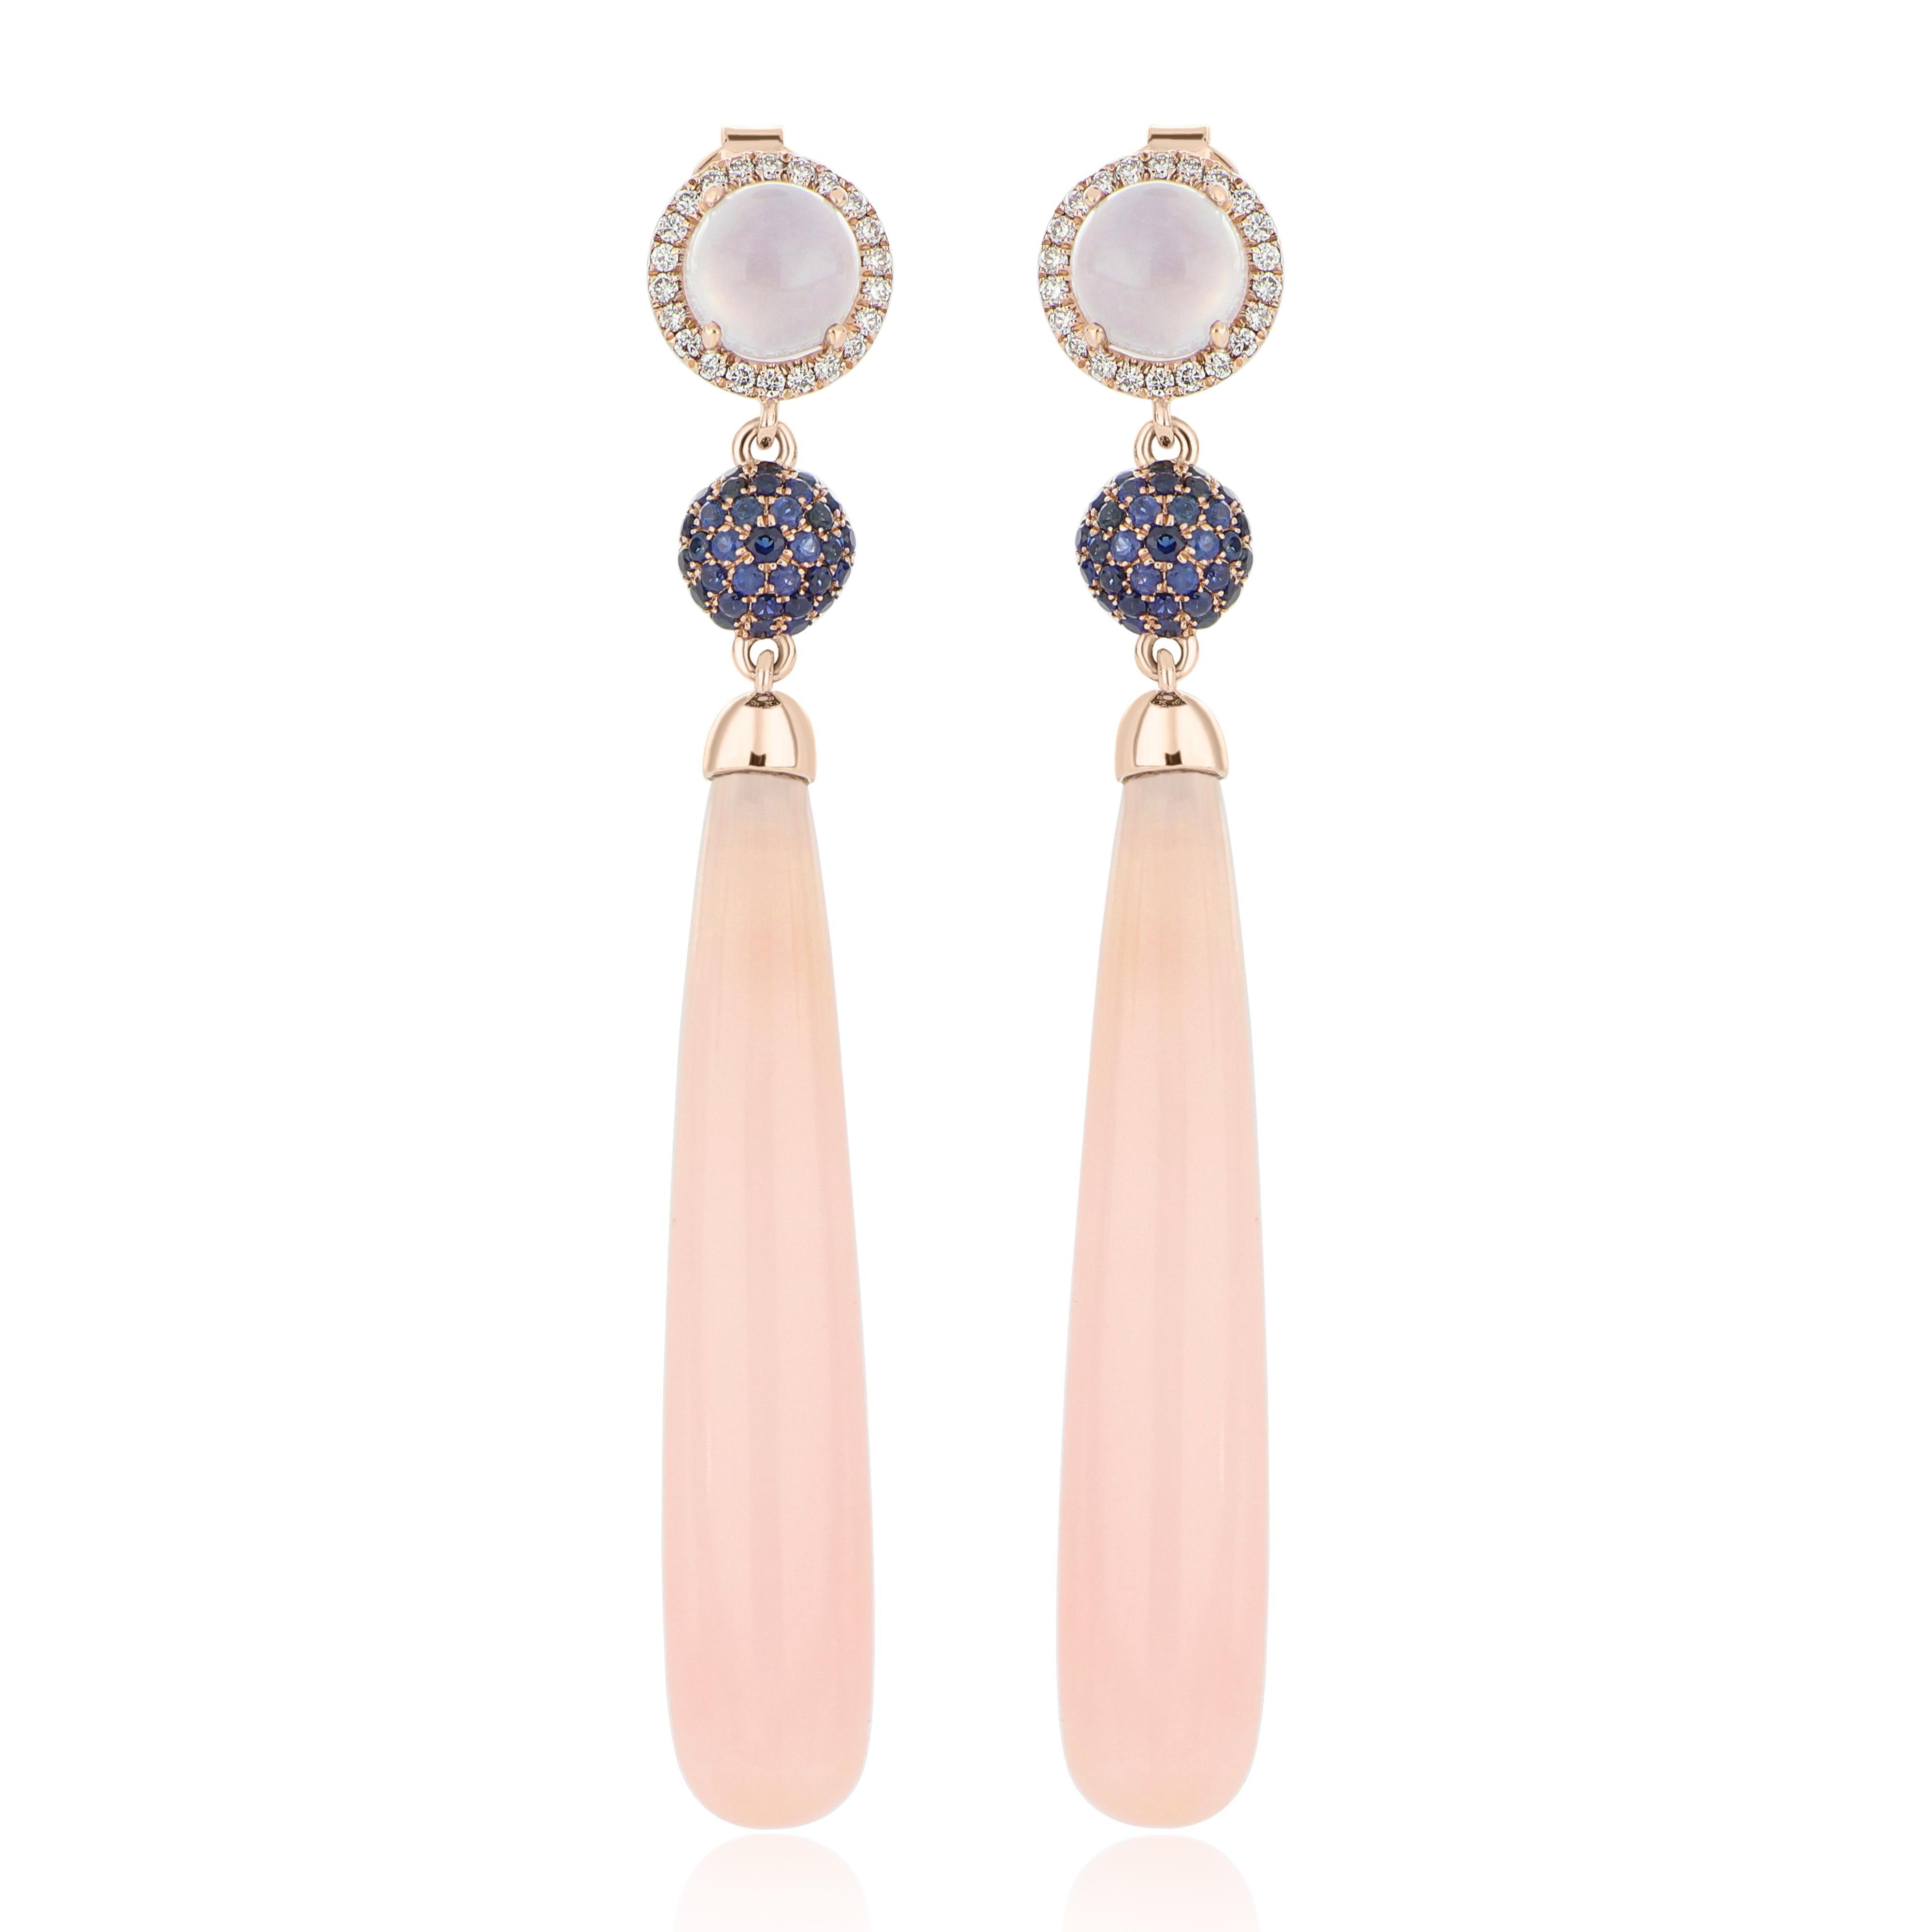 Elegant and exquisitely detailed 14 Karat Rose Gold Pair of Earrings, set with 19.90 Cts Pink Opal .Drop Shape Pink Opal, and 2.03 Cts of Round Cut Blue Chalcedony accented with Blue Sapphire and micro pave set Diamonds, weighing approx. 0.165 Cts